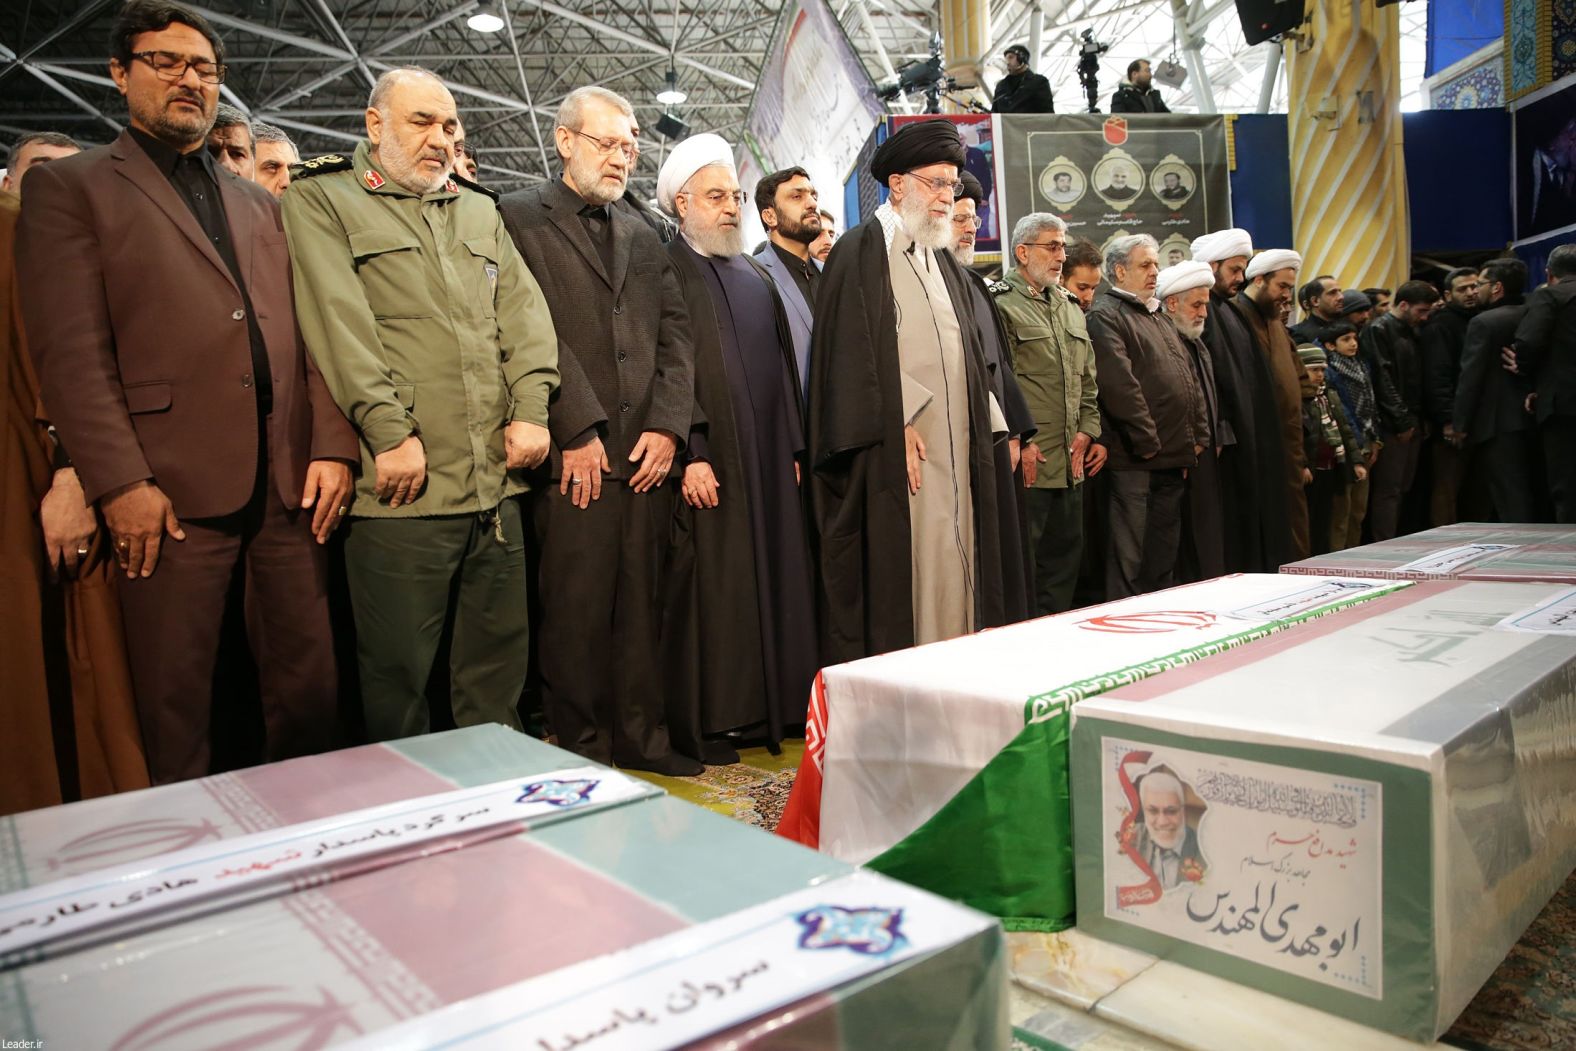 Iranian President Hassan Rouhani, fourth from left, and Supreme Leader Ayatollah Ali Khamenei, fifth from left, attend the funeral in Tehran.